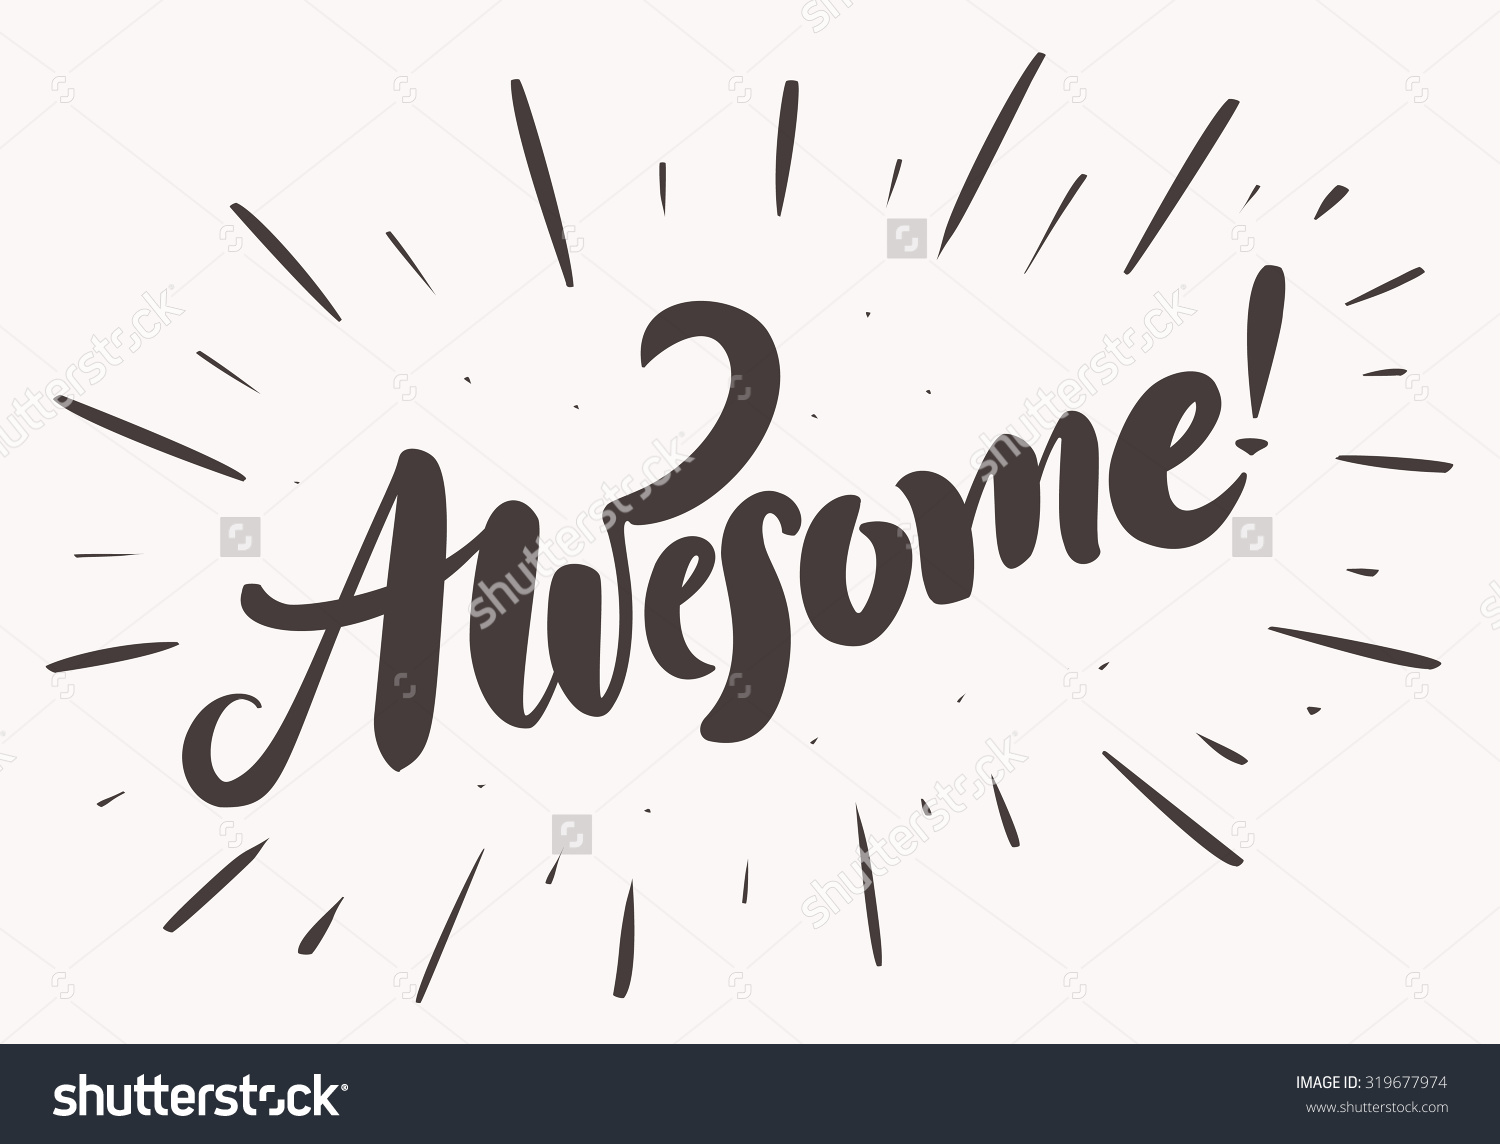 awesome clipart black and white